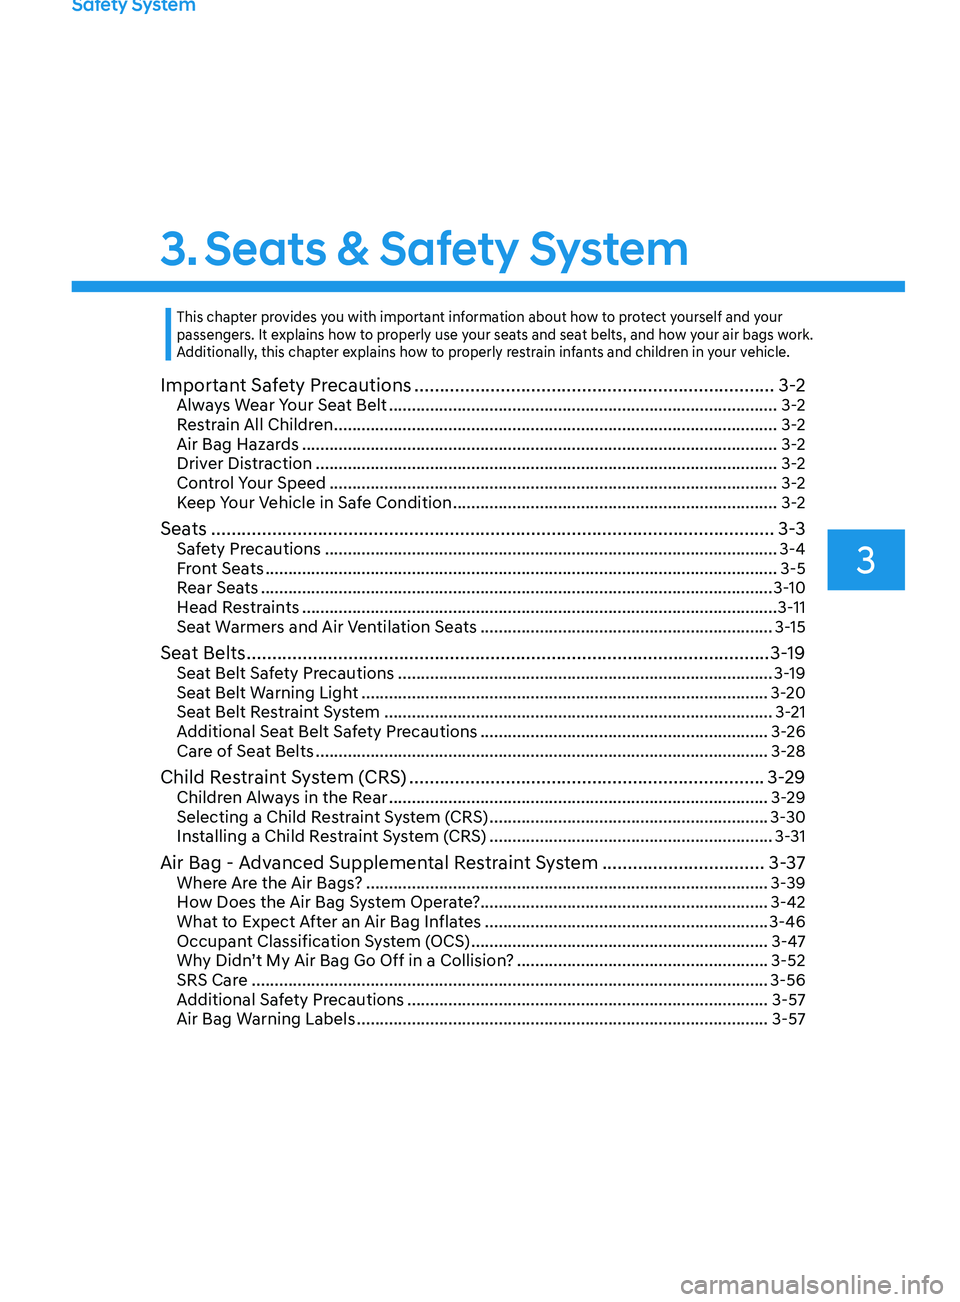 HYUNDAI SONATA LIMITED 2021  Owners Manual Safety System
3. Seats & Safety System
3
Important Safety Precautions ....................................................................... 3 -2Always Wear Your Seat Belt ...........................